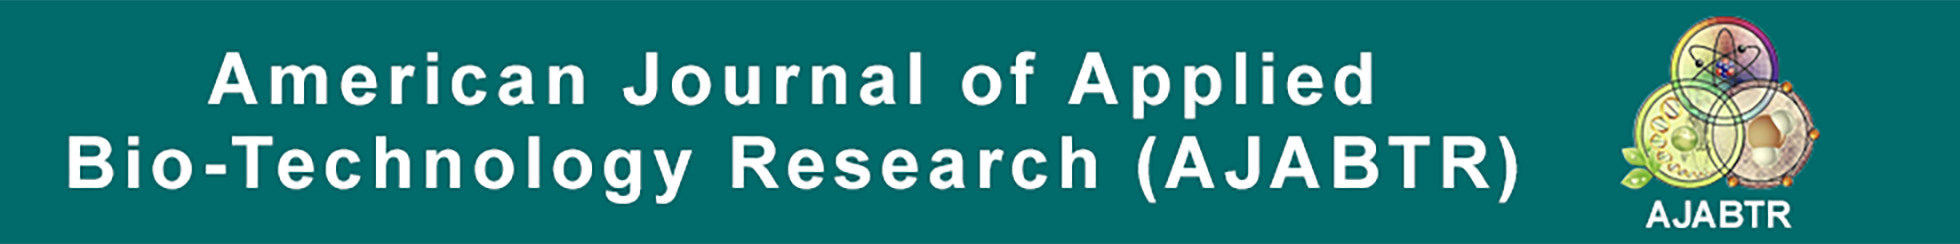 American Journal of Applied Bio-Technology Research (AJABTR)